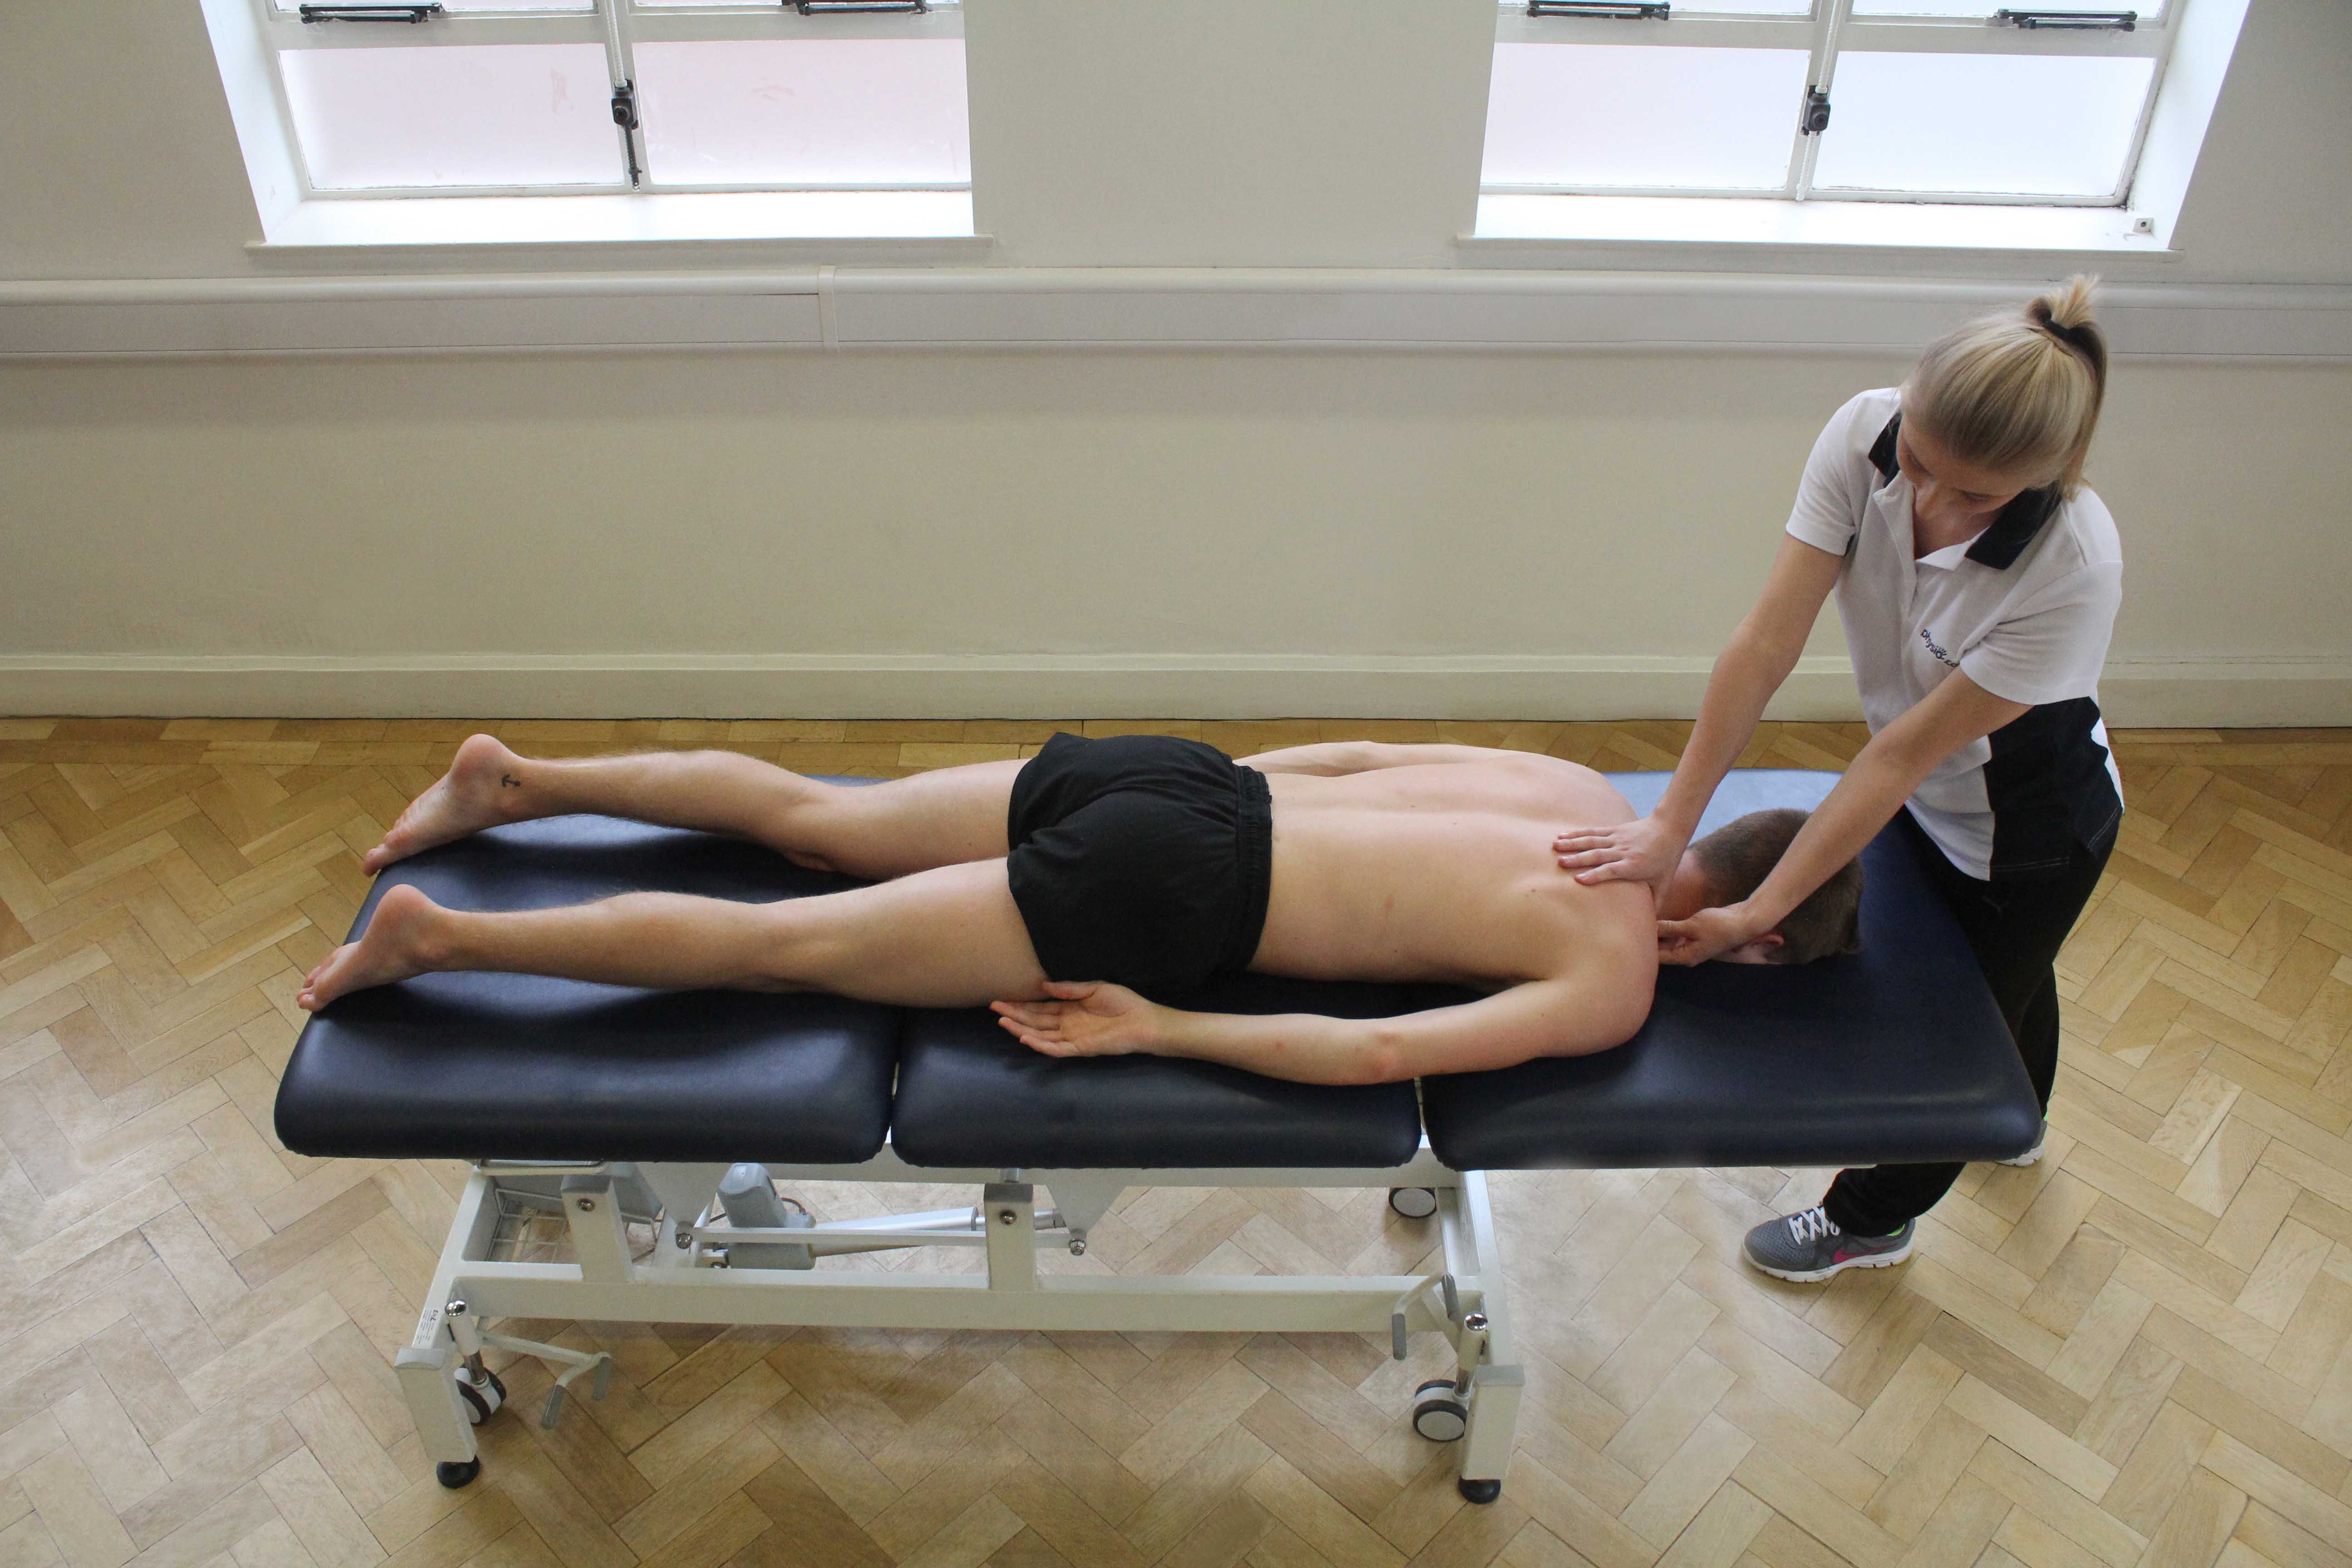 Trigger point massage applied to trapezius muscle